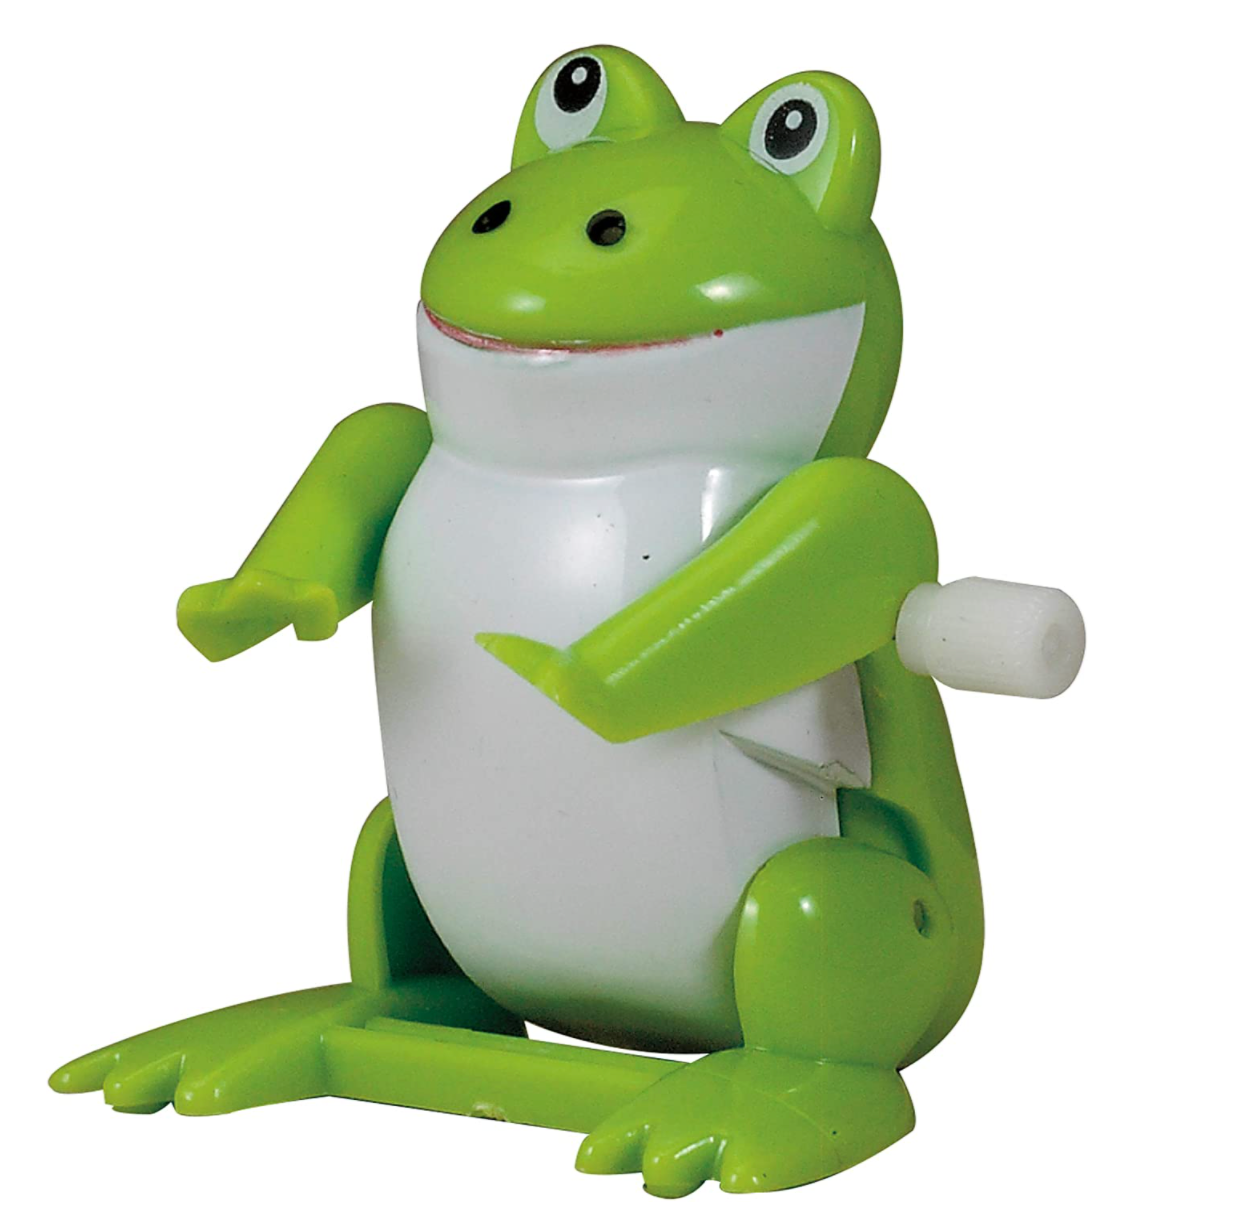 1 Piece of Rubber Frog Toy in Green Color for Kids to Play and Enjoy